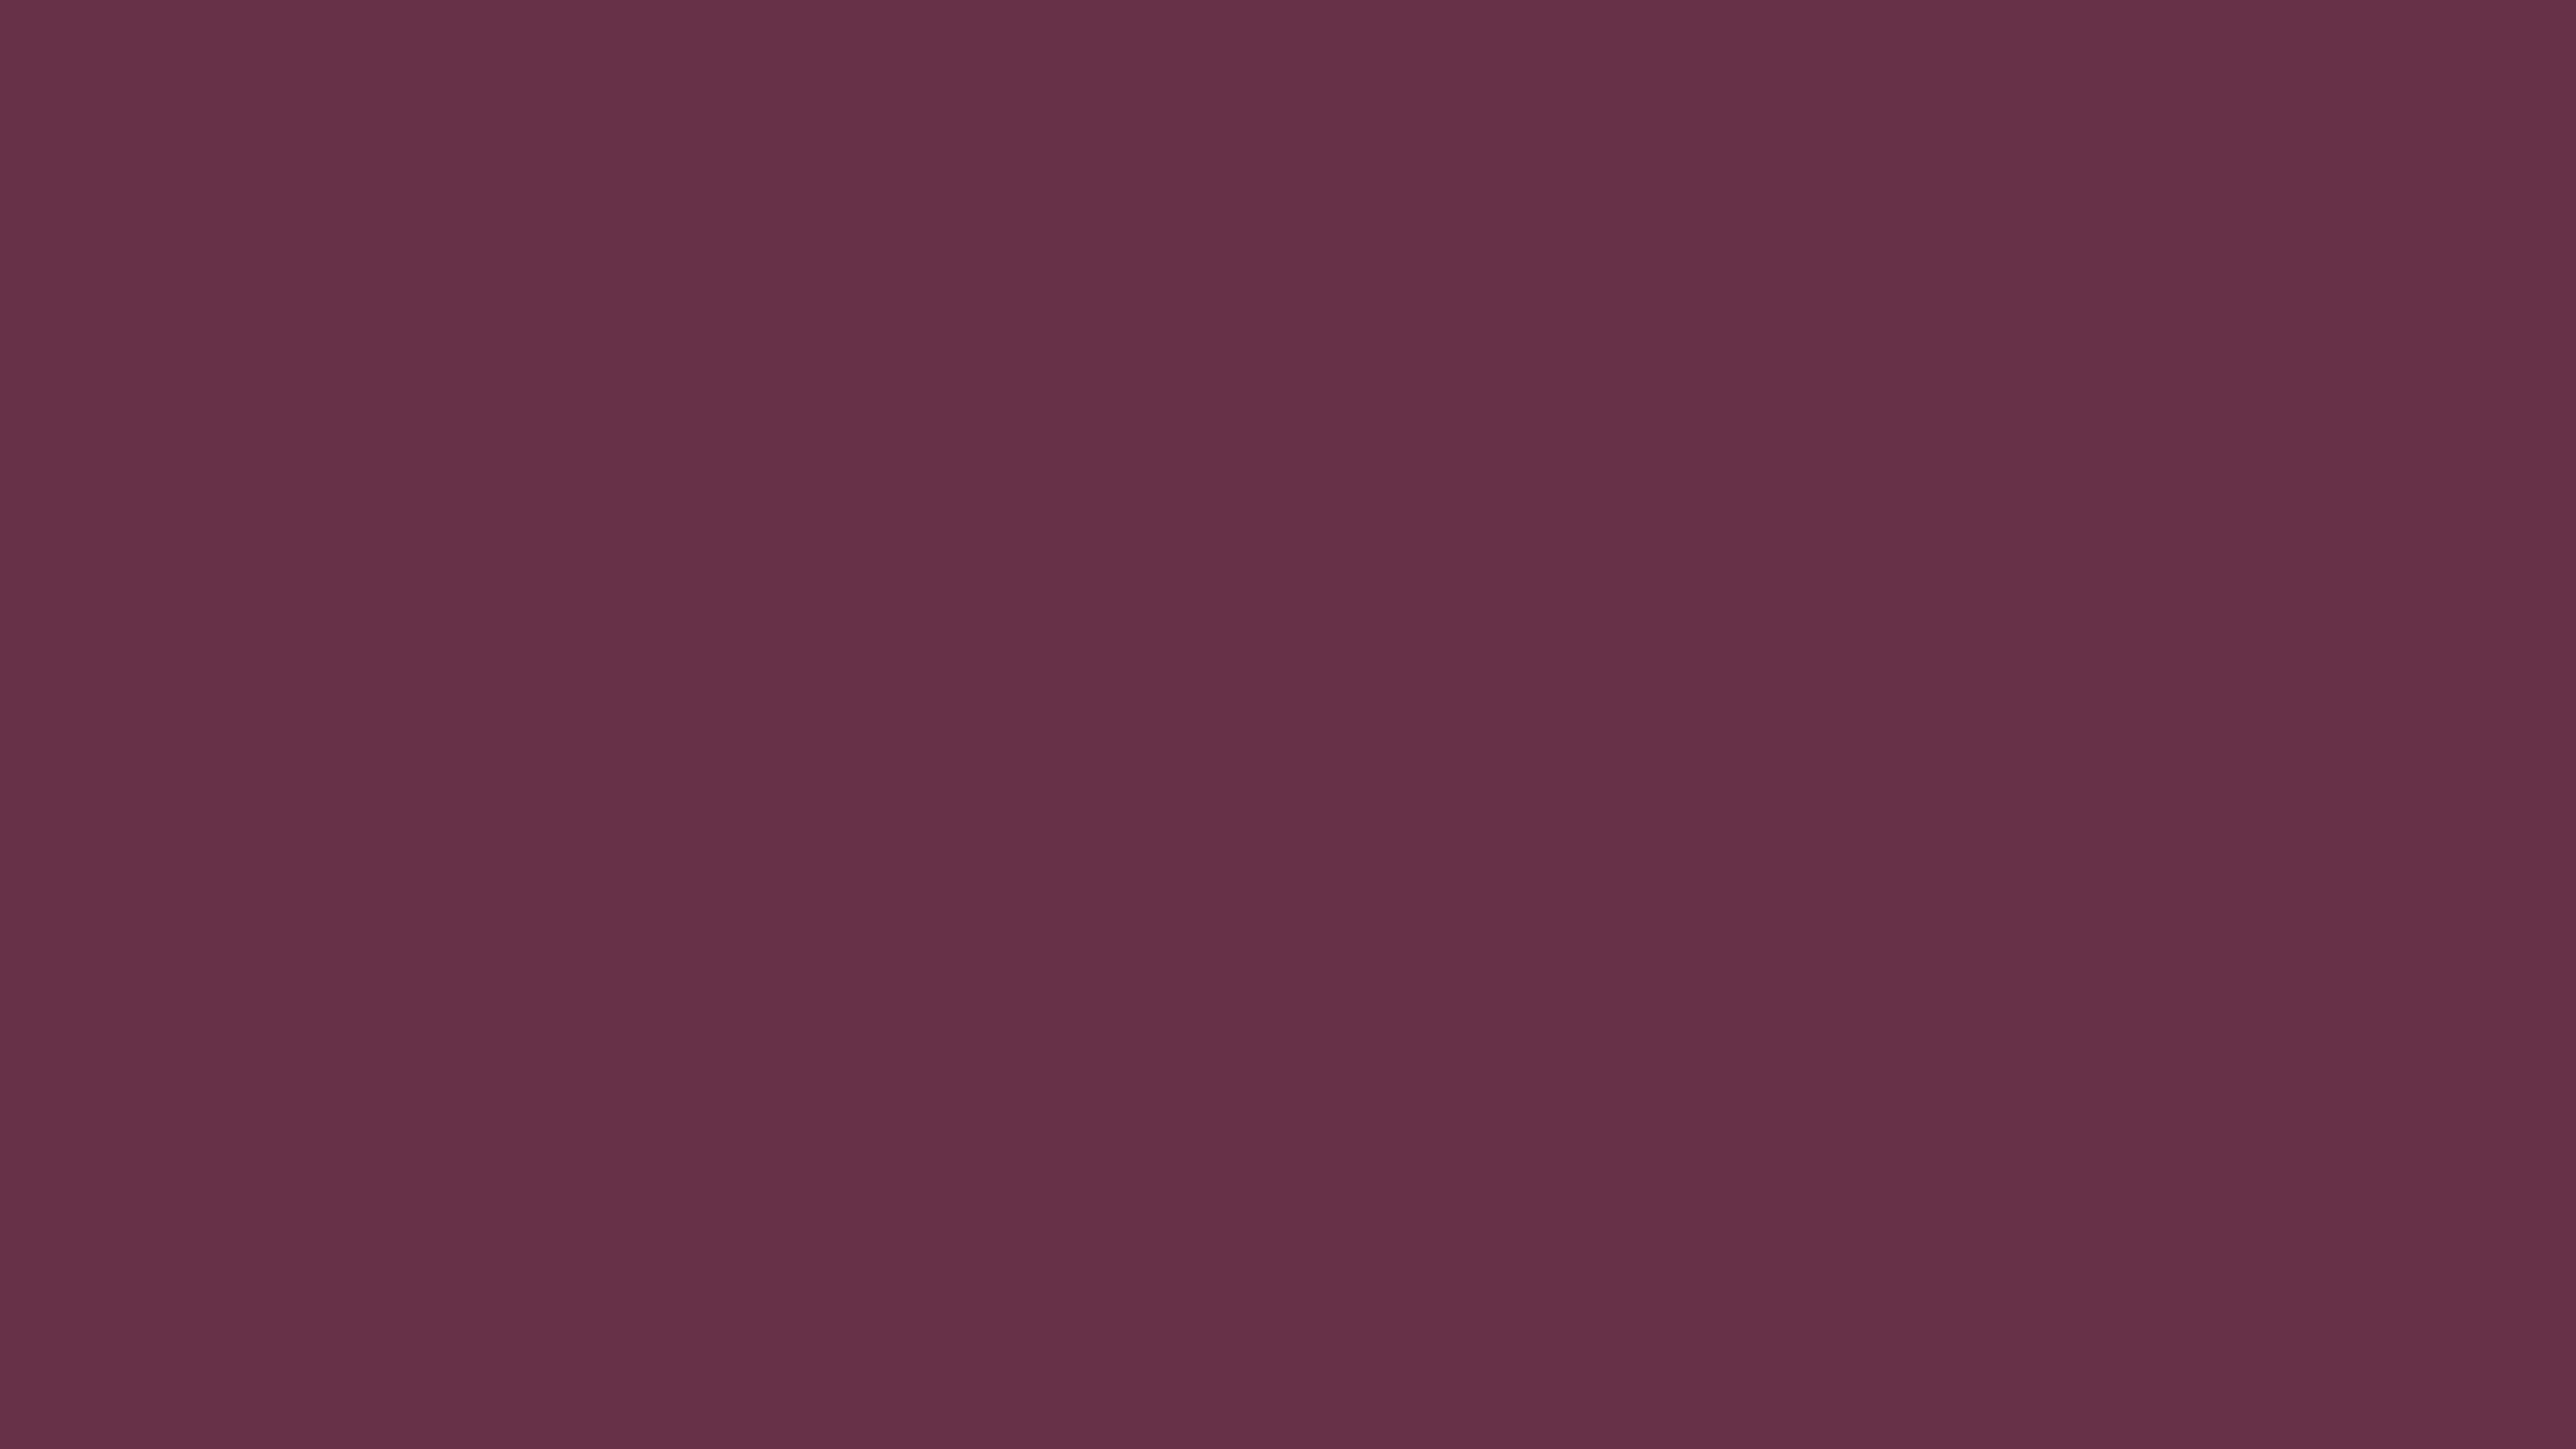 4096x2304 Wine Dregs Solid Color Background